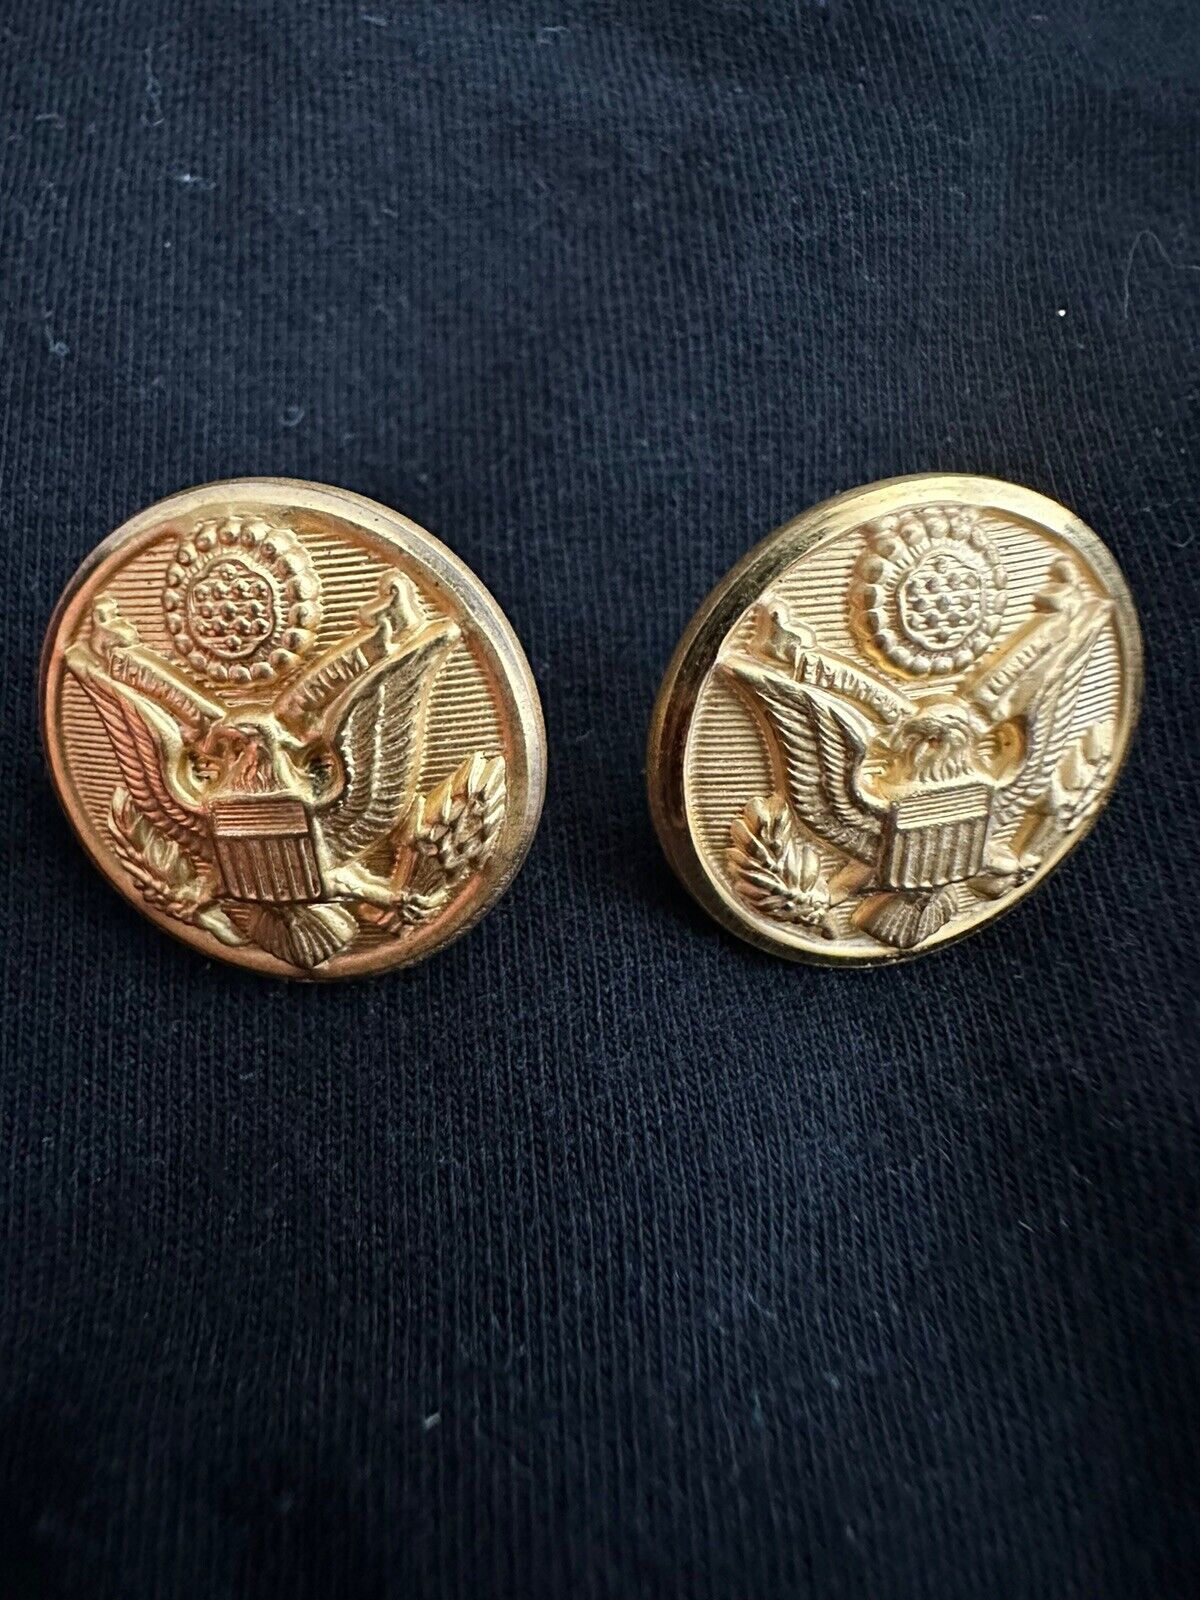 Vintage Military Brass US Navy Waterbury Button Company Uniform Buttons (2) Без бренда